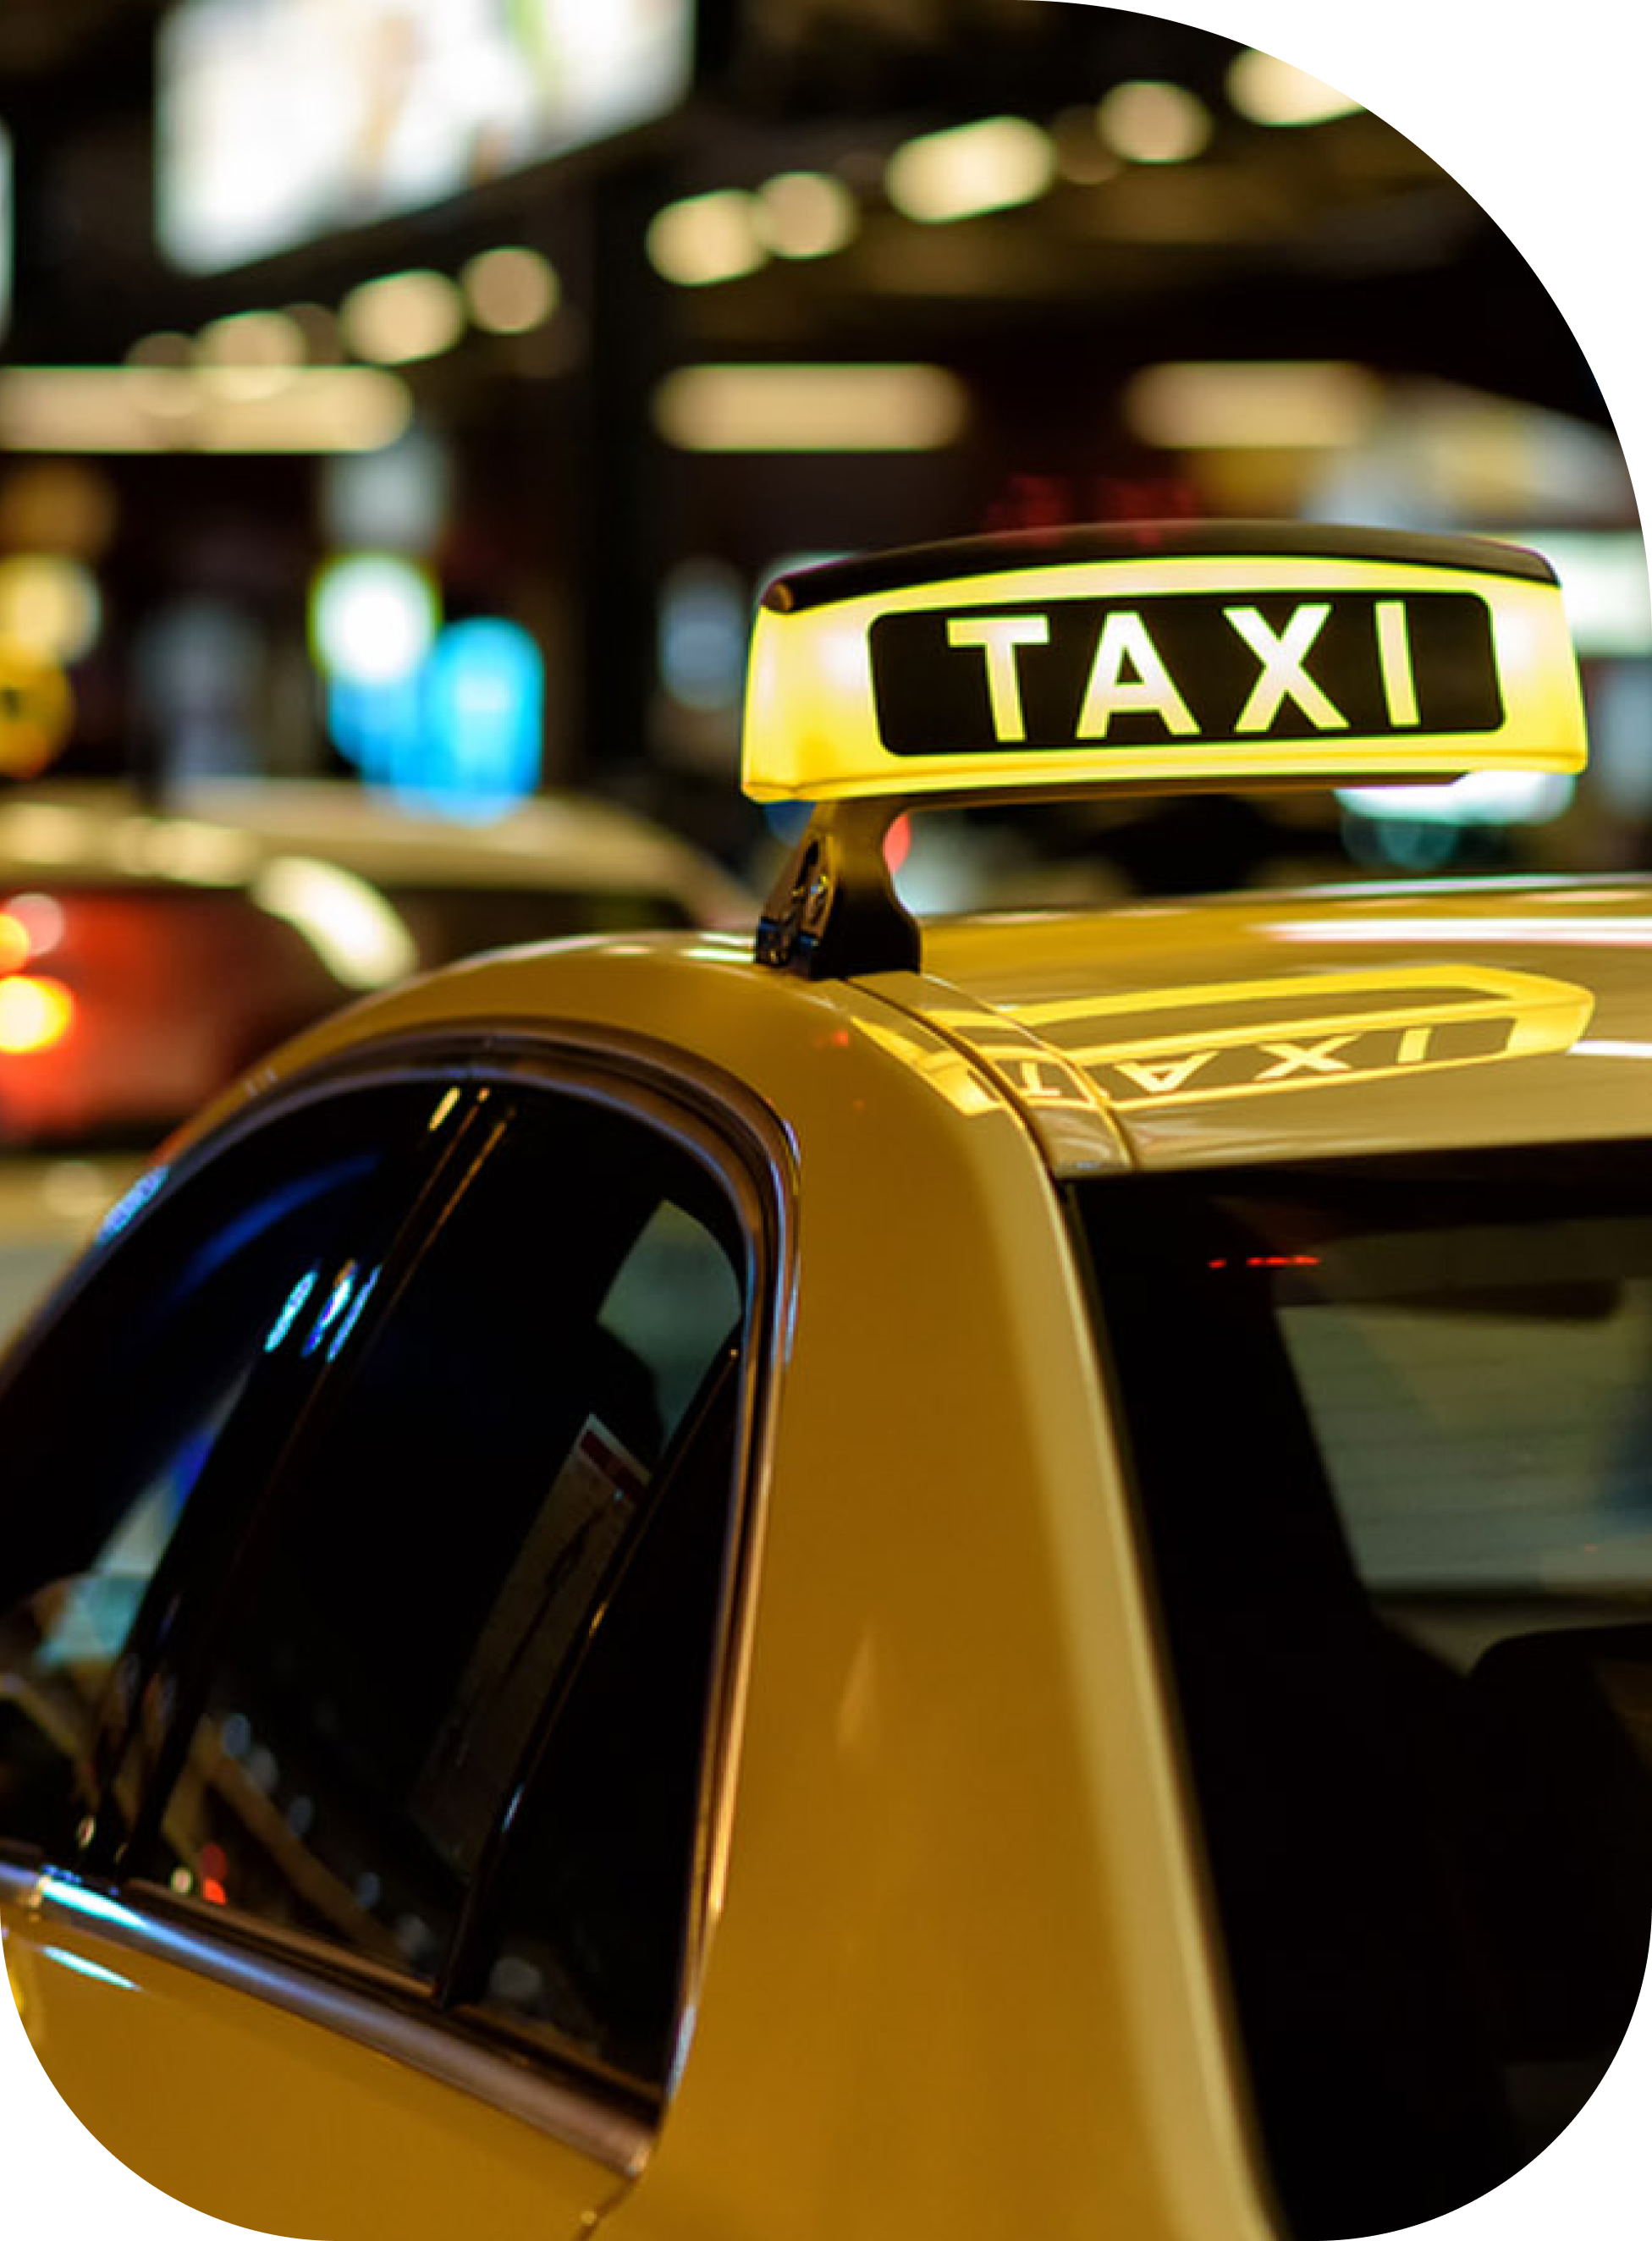 An Image of a taxi